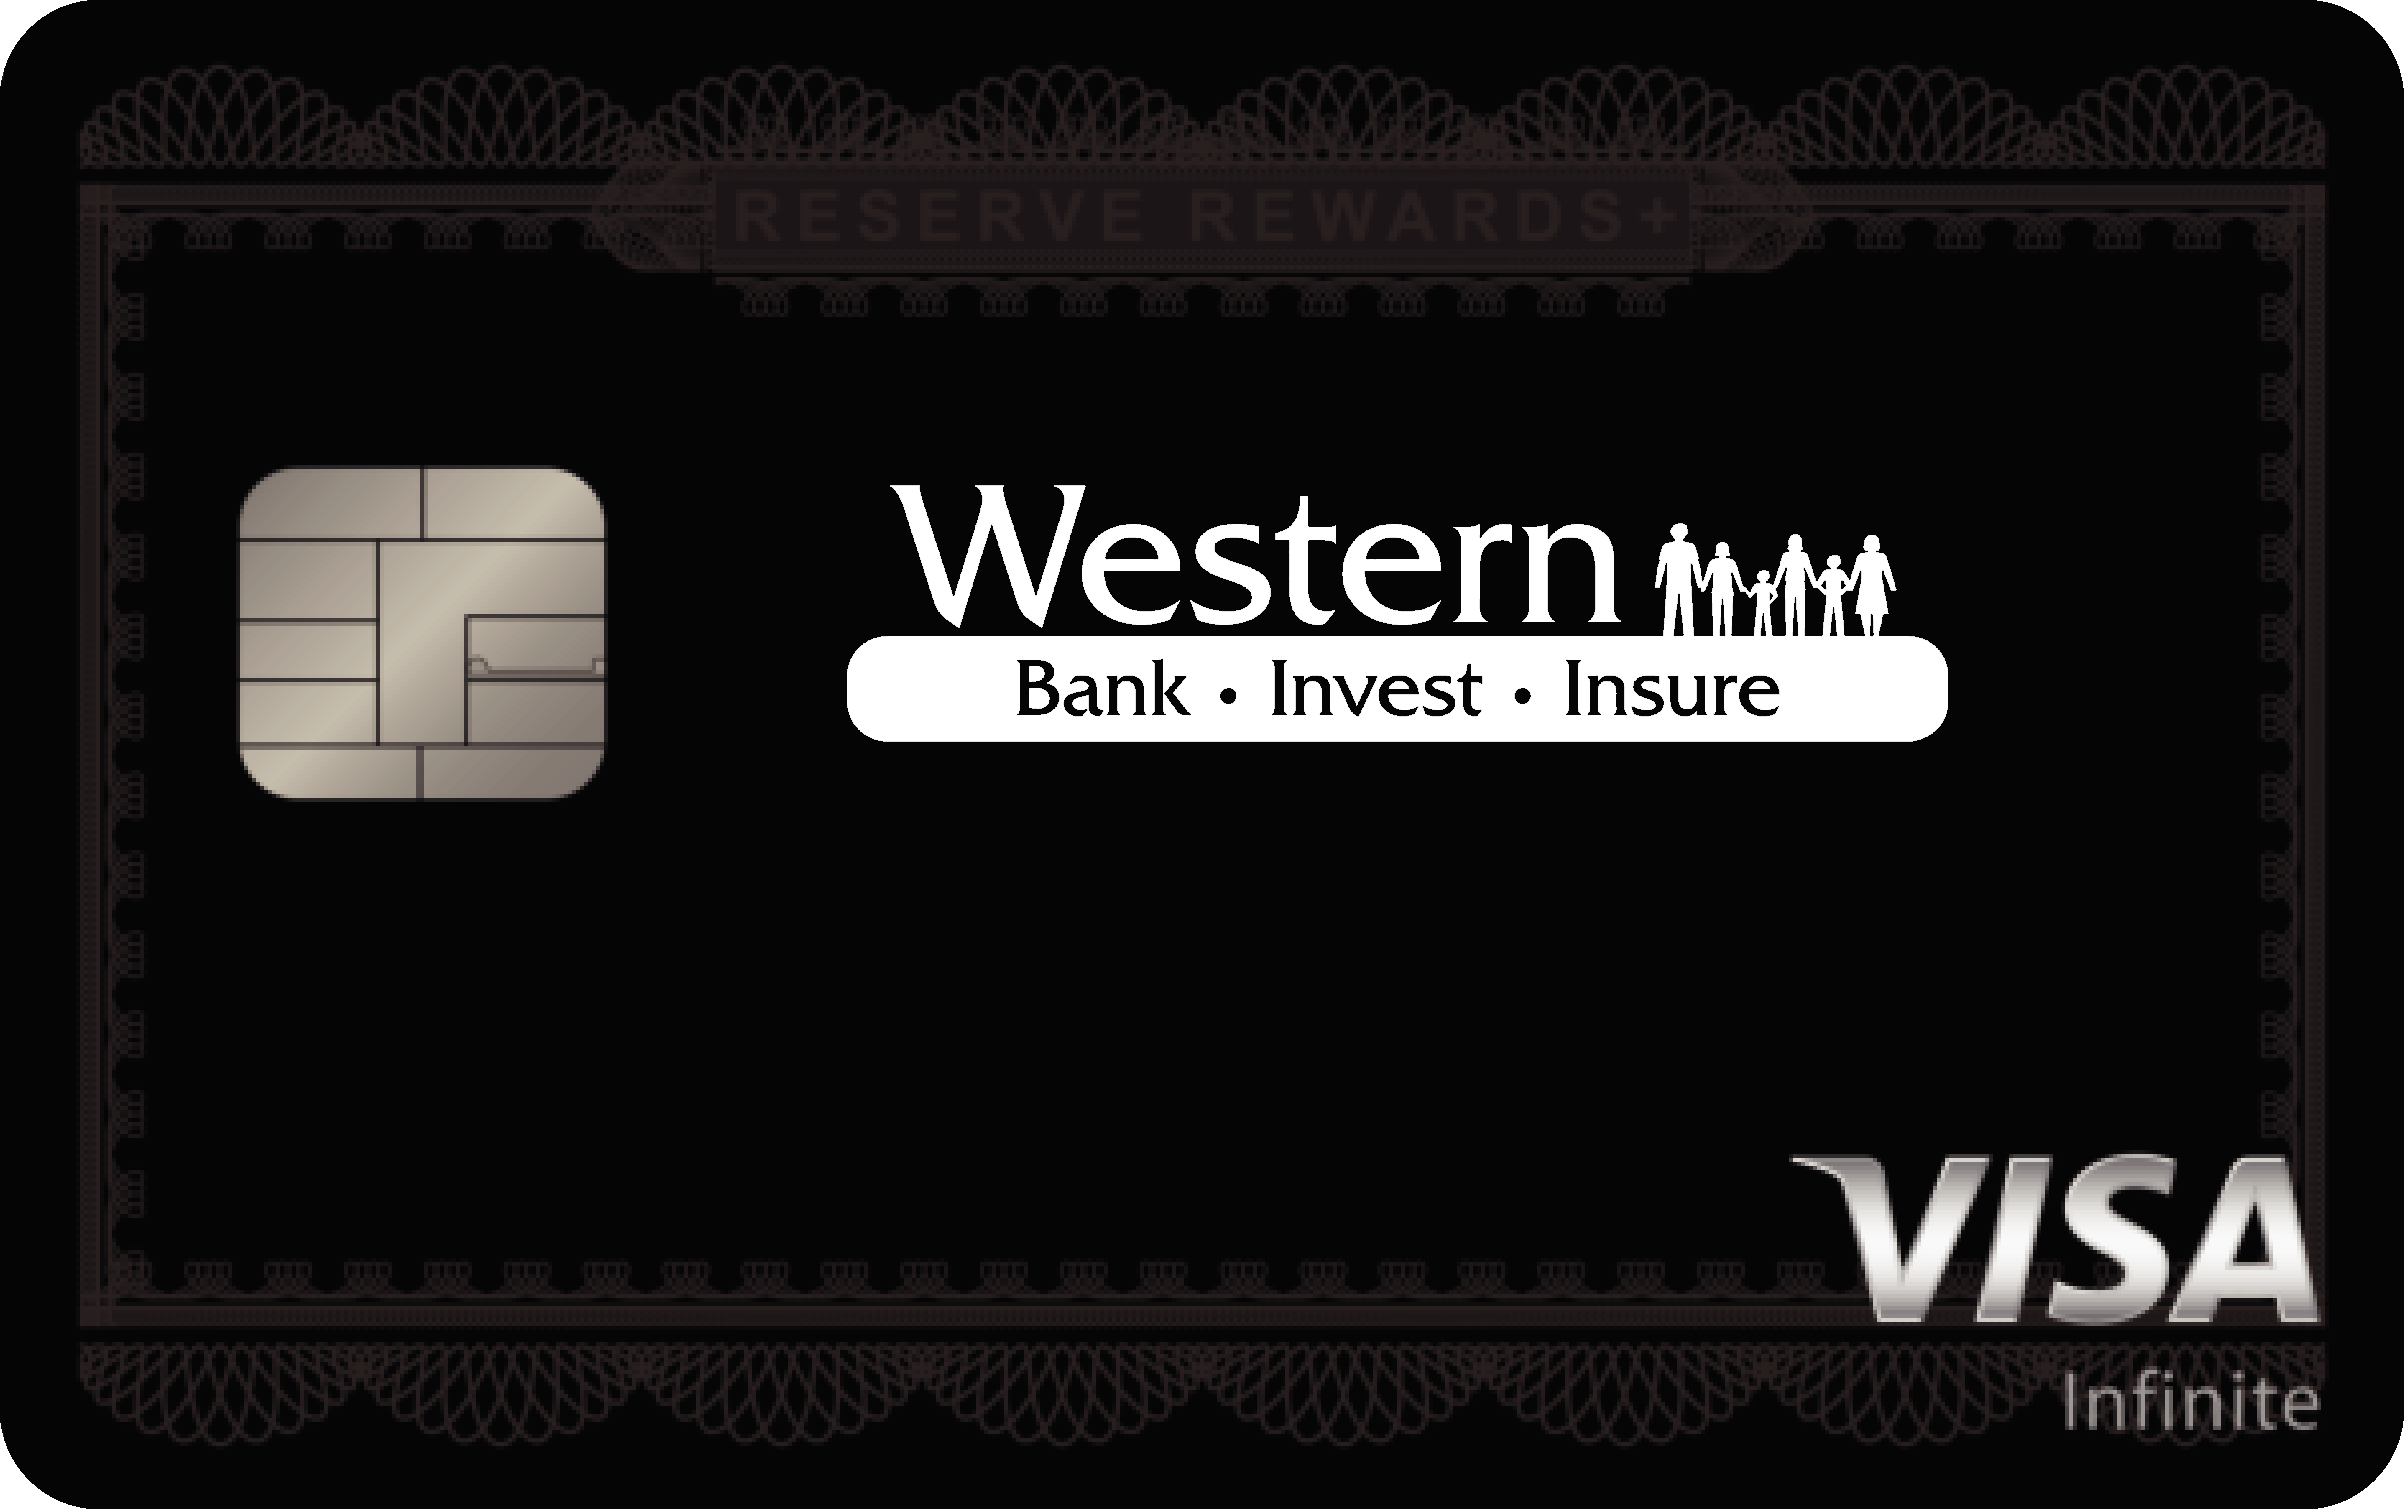 Western State Bank